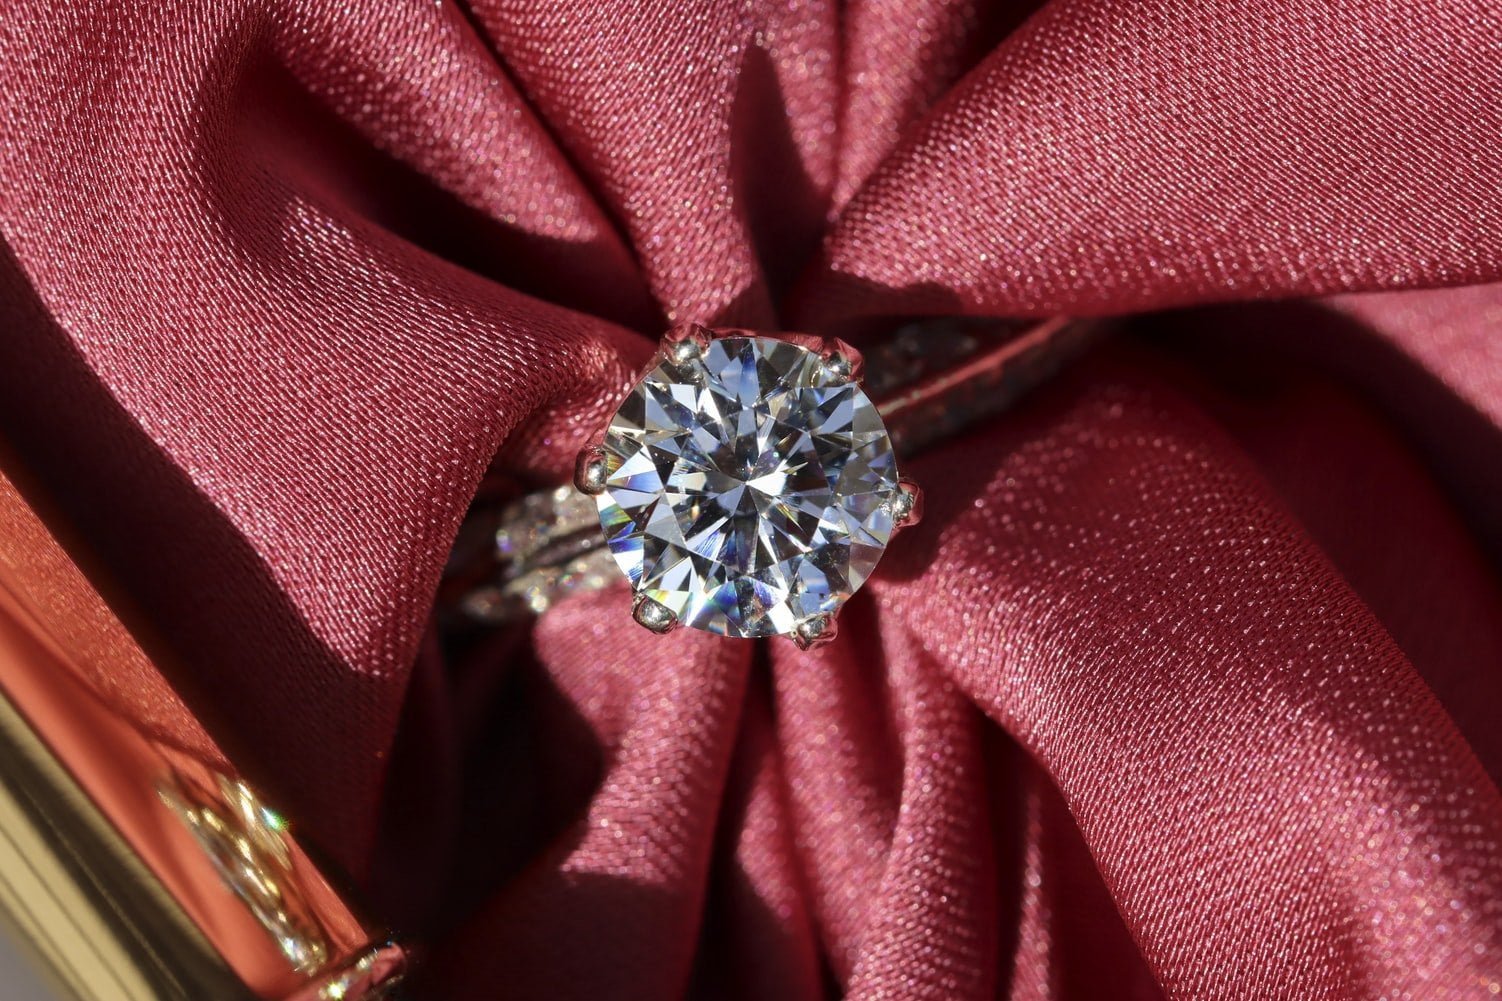 How To Choose a Diamond Engagement Ring For Your Significant Other